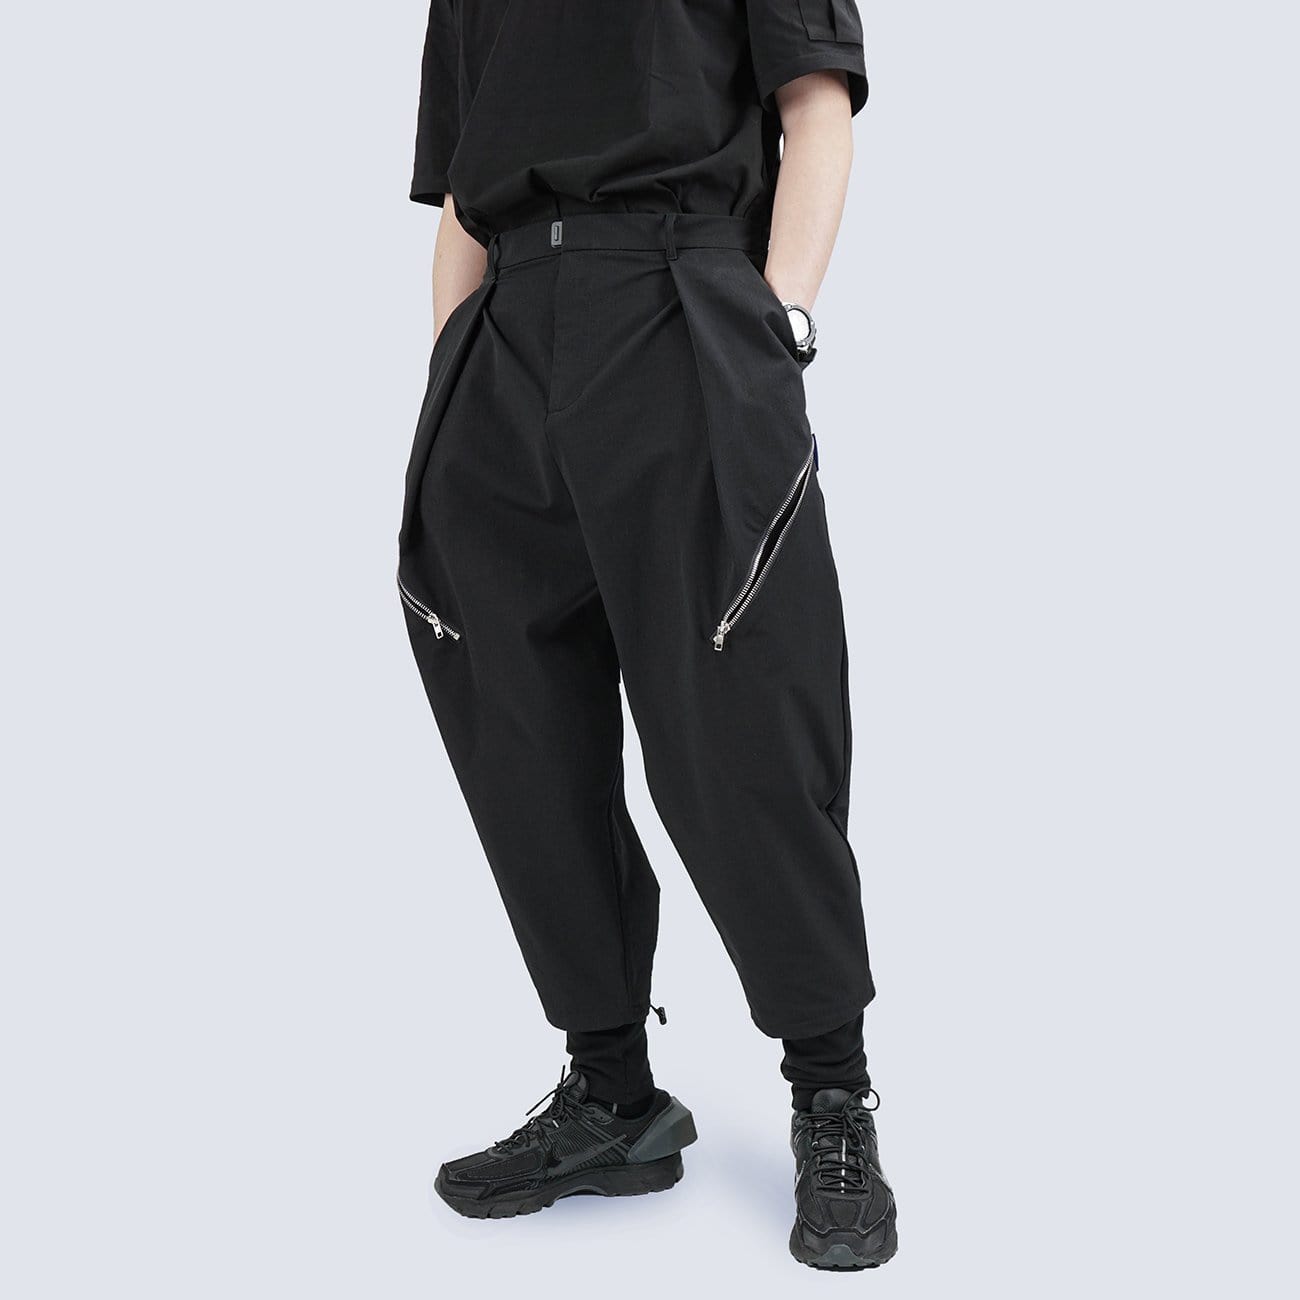 WLS Double Piece Drawstring Pants